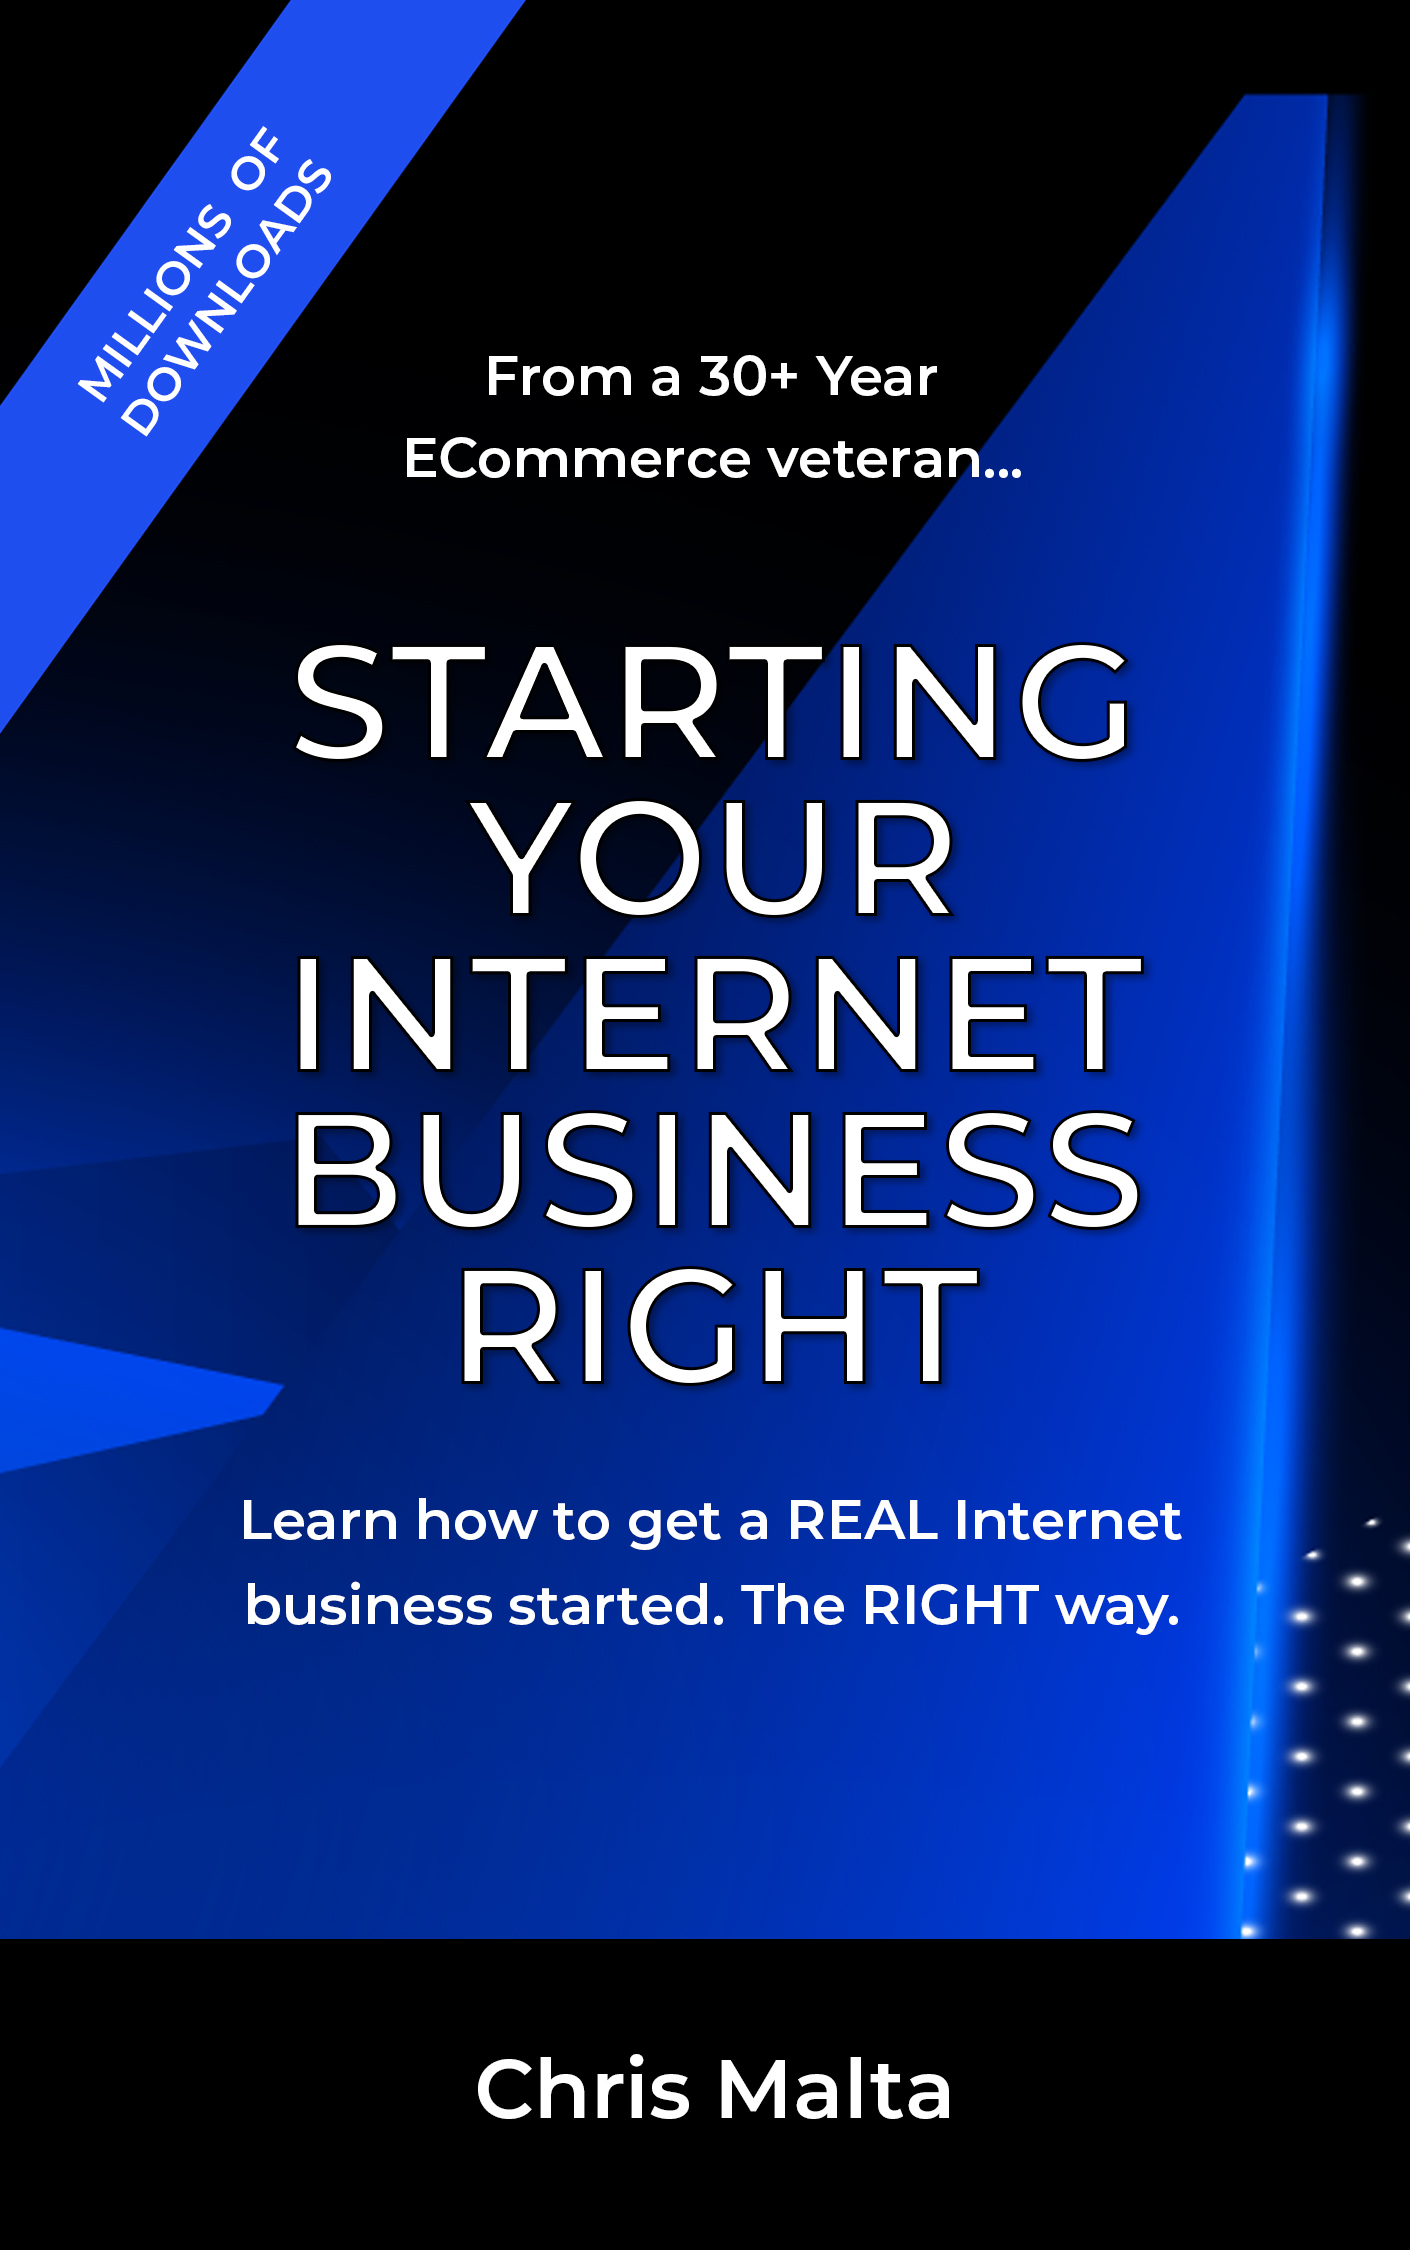 Starting your Internet Business Right | Free eBook